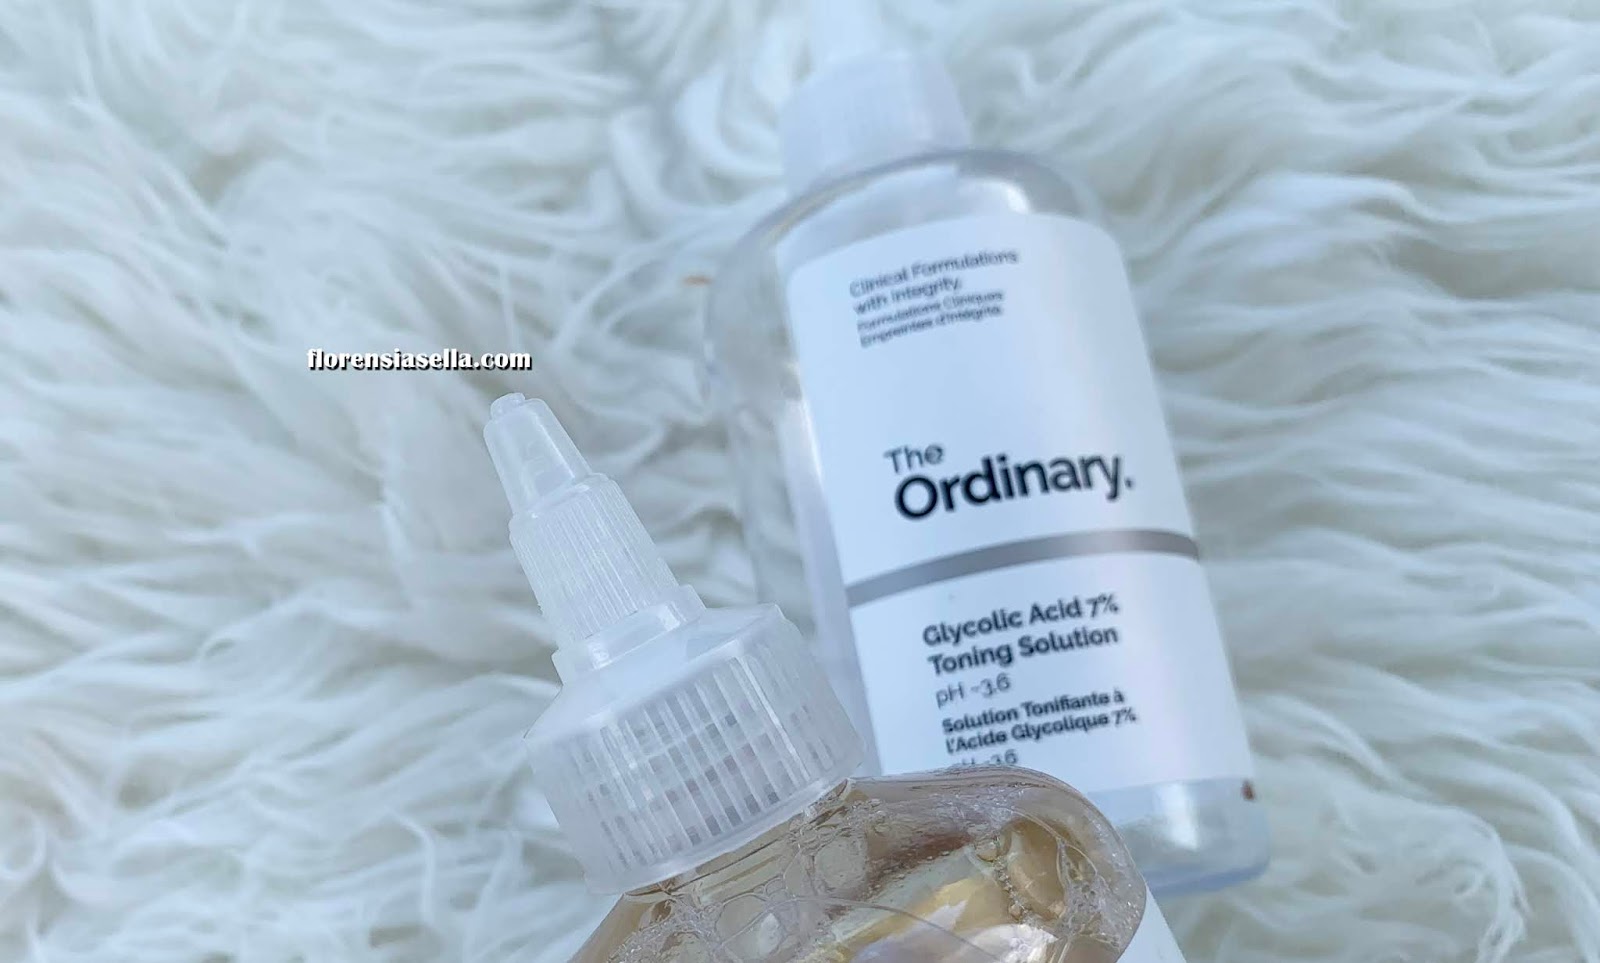 The ordinary Toning solution. The ordinary код. The ordinary код на упаковке. Glycolic acid 7% Toning solution. The ordinary toning